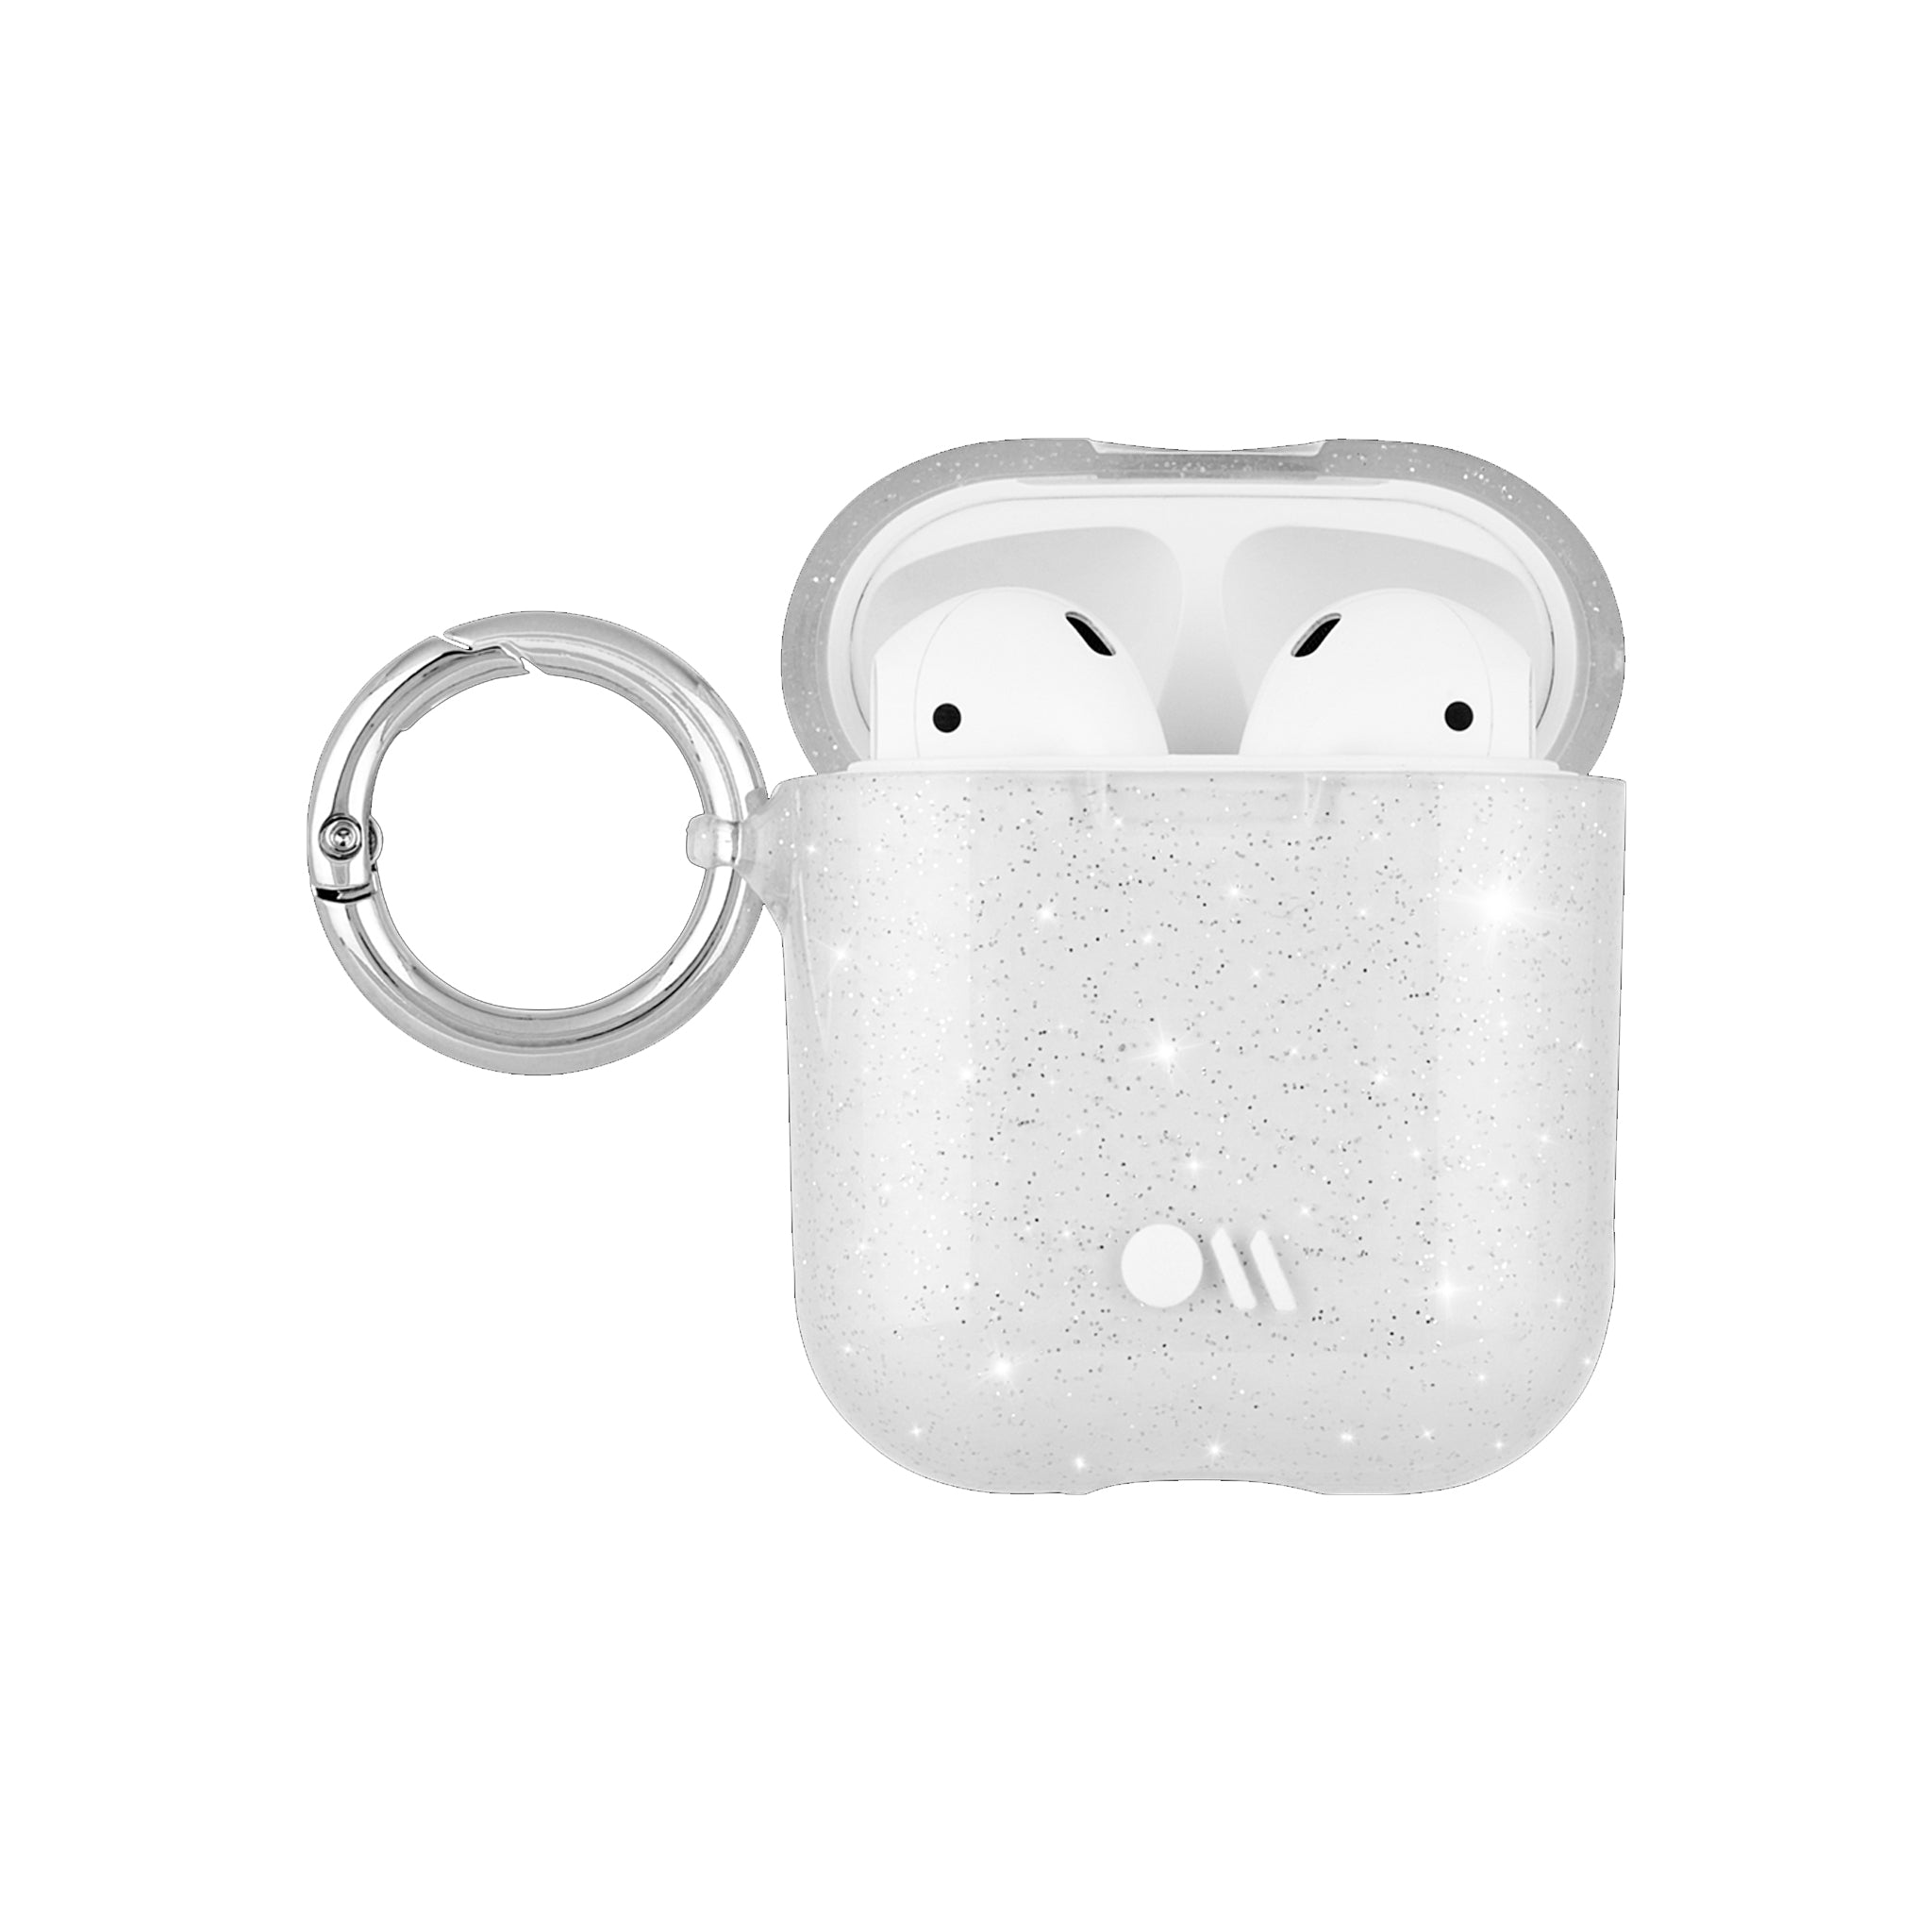 Case-mate - Hook Ups Case With Neck Strap For Apple Airpods - Clear